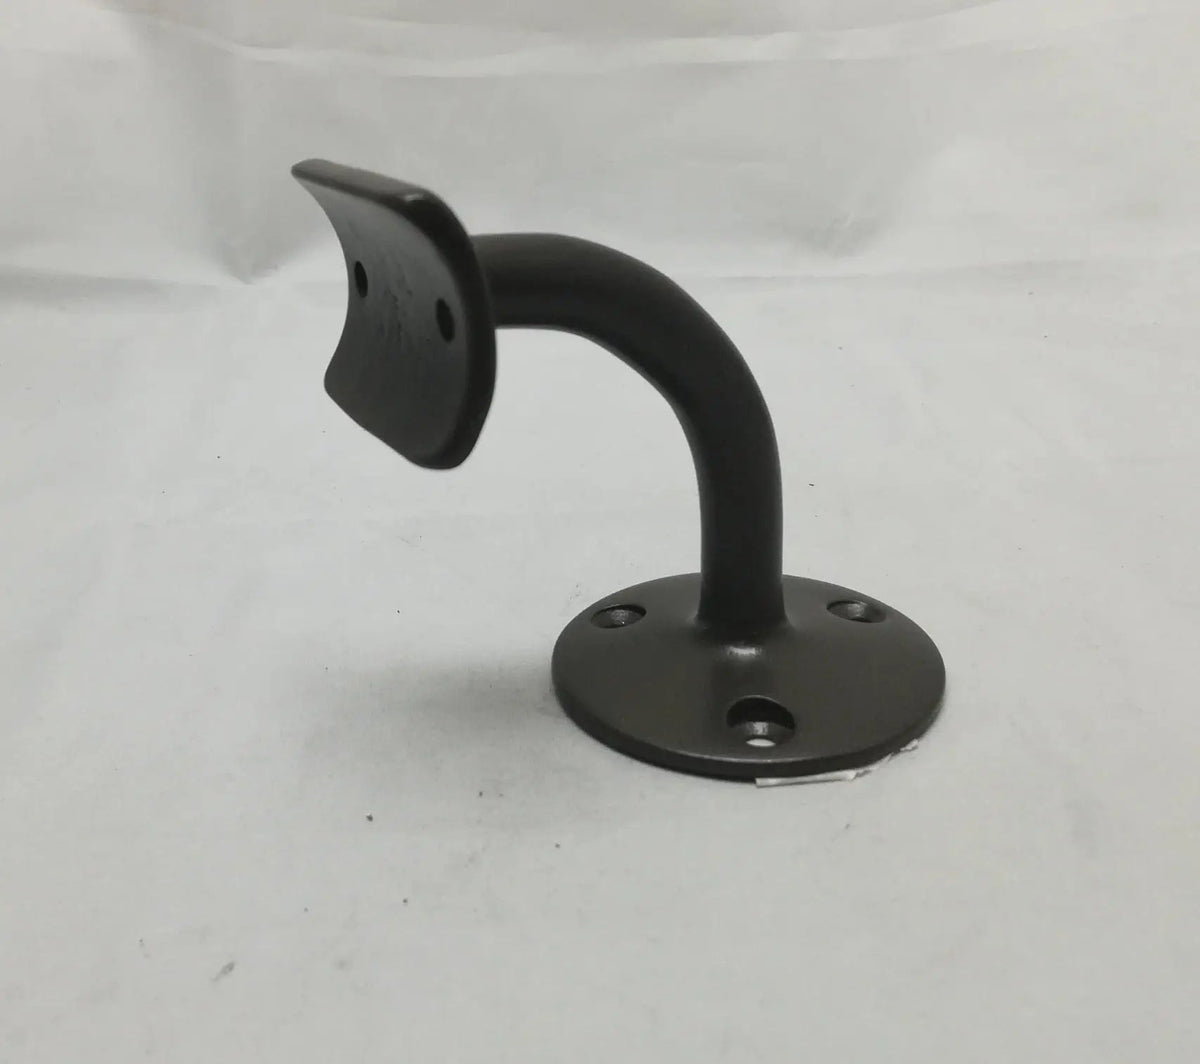 3-Screw Hand Rail Bracket for 1-1/2" Tubing Brackets, Components for 1-1/2" Od TubingTrade Diversified